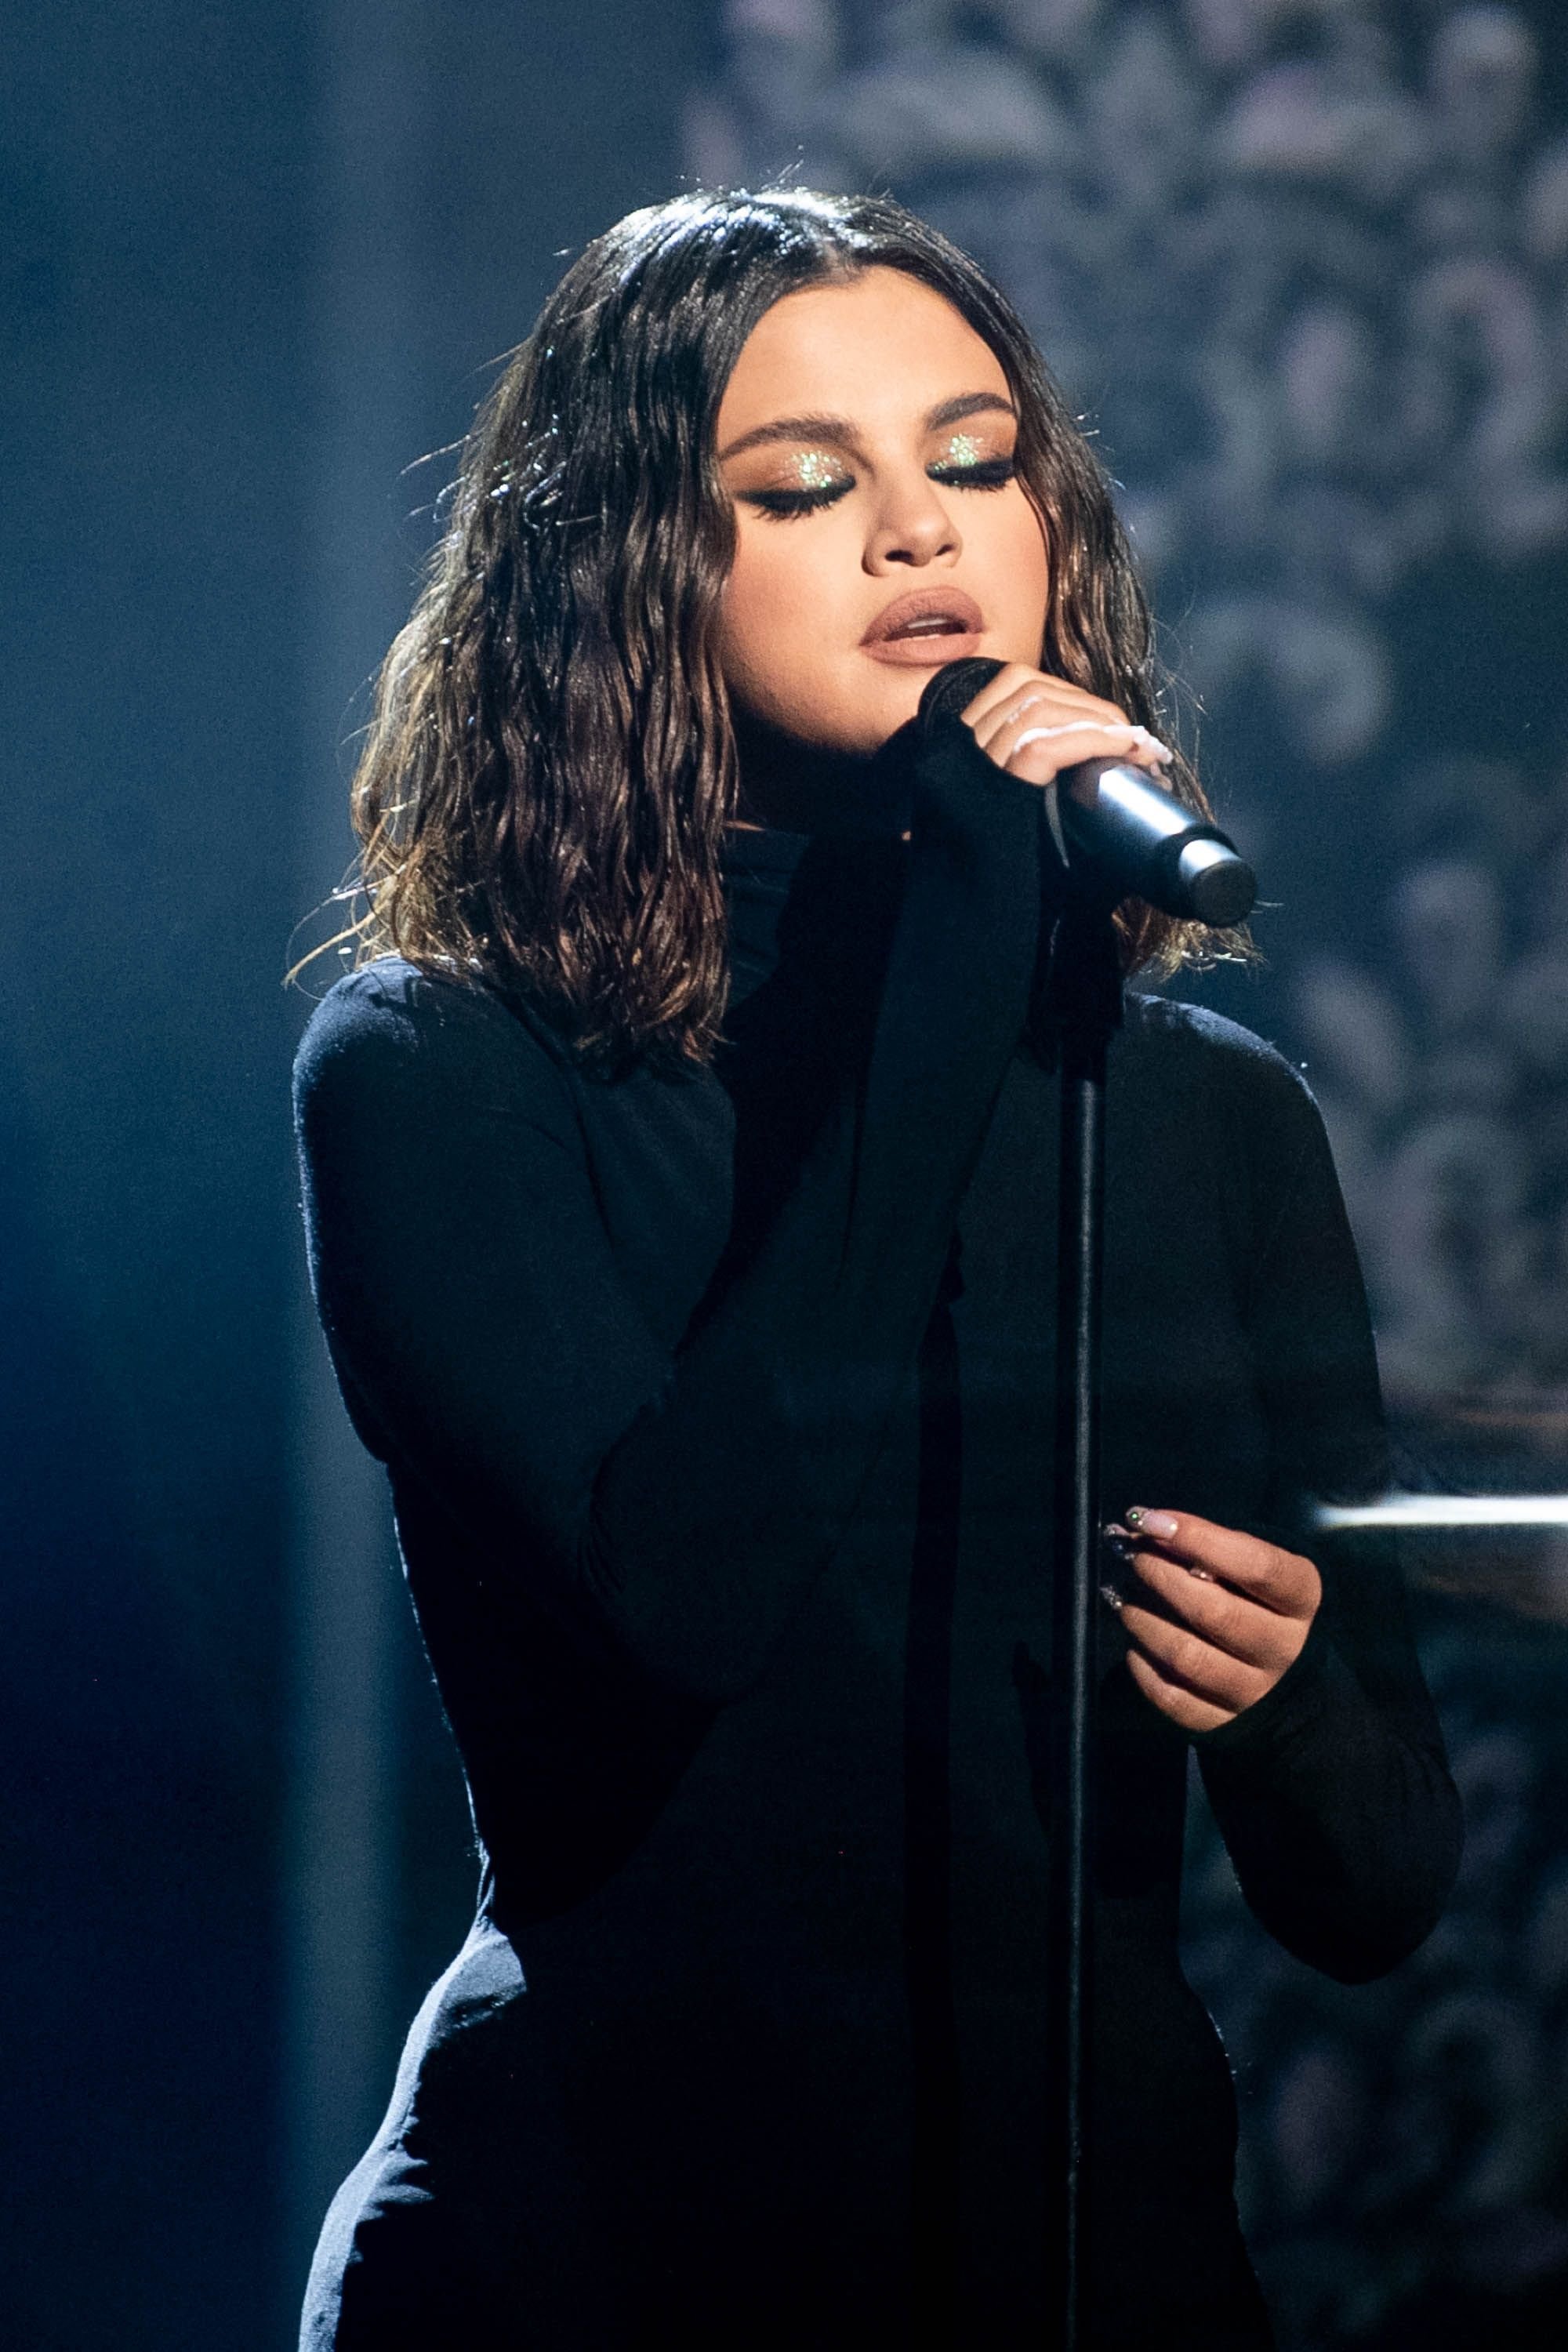 Selena Gomez at the 2019 American Music Awards at Microsoft Theater on November 24, 2019 | Source: Getty Images